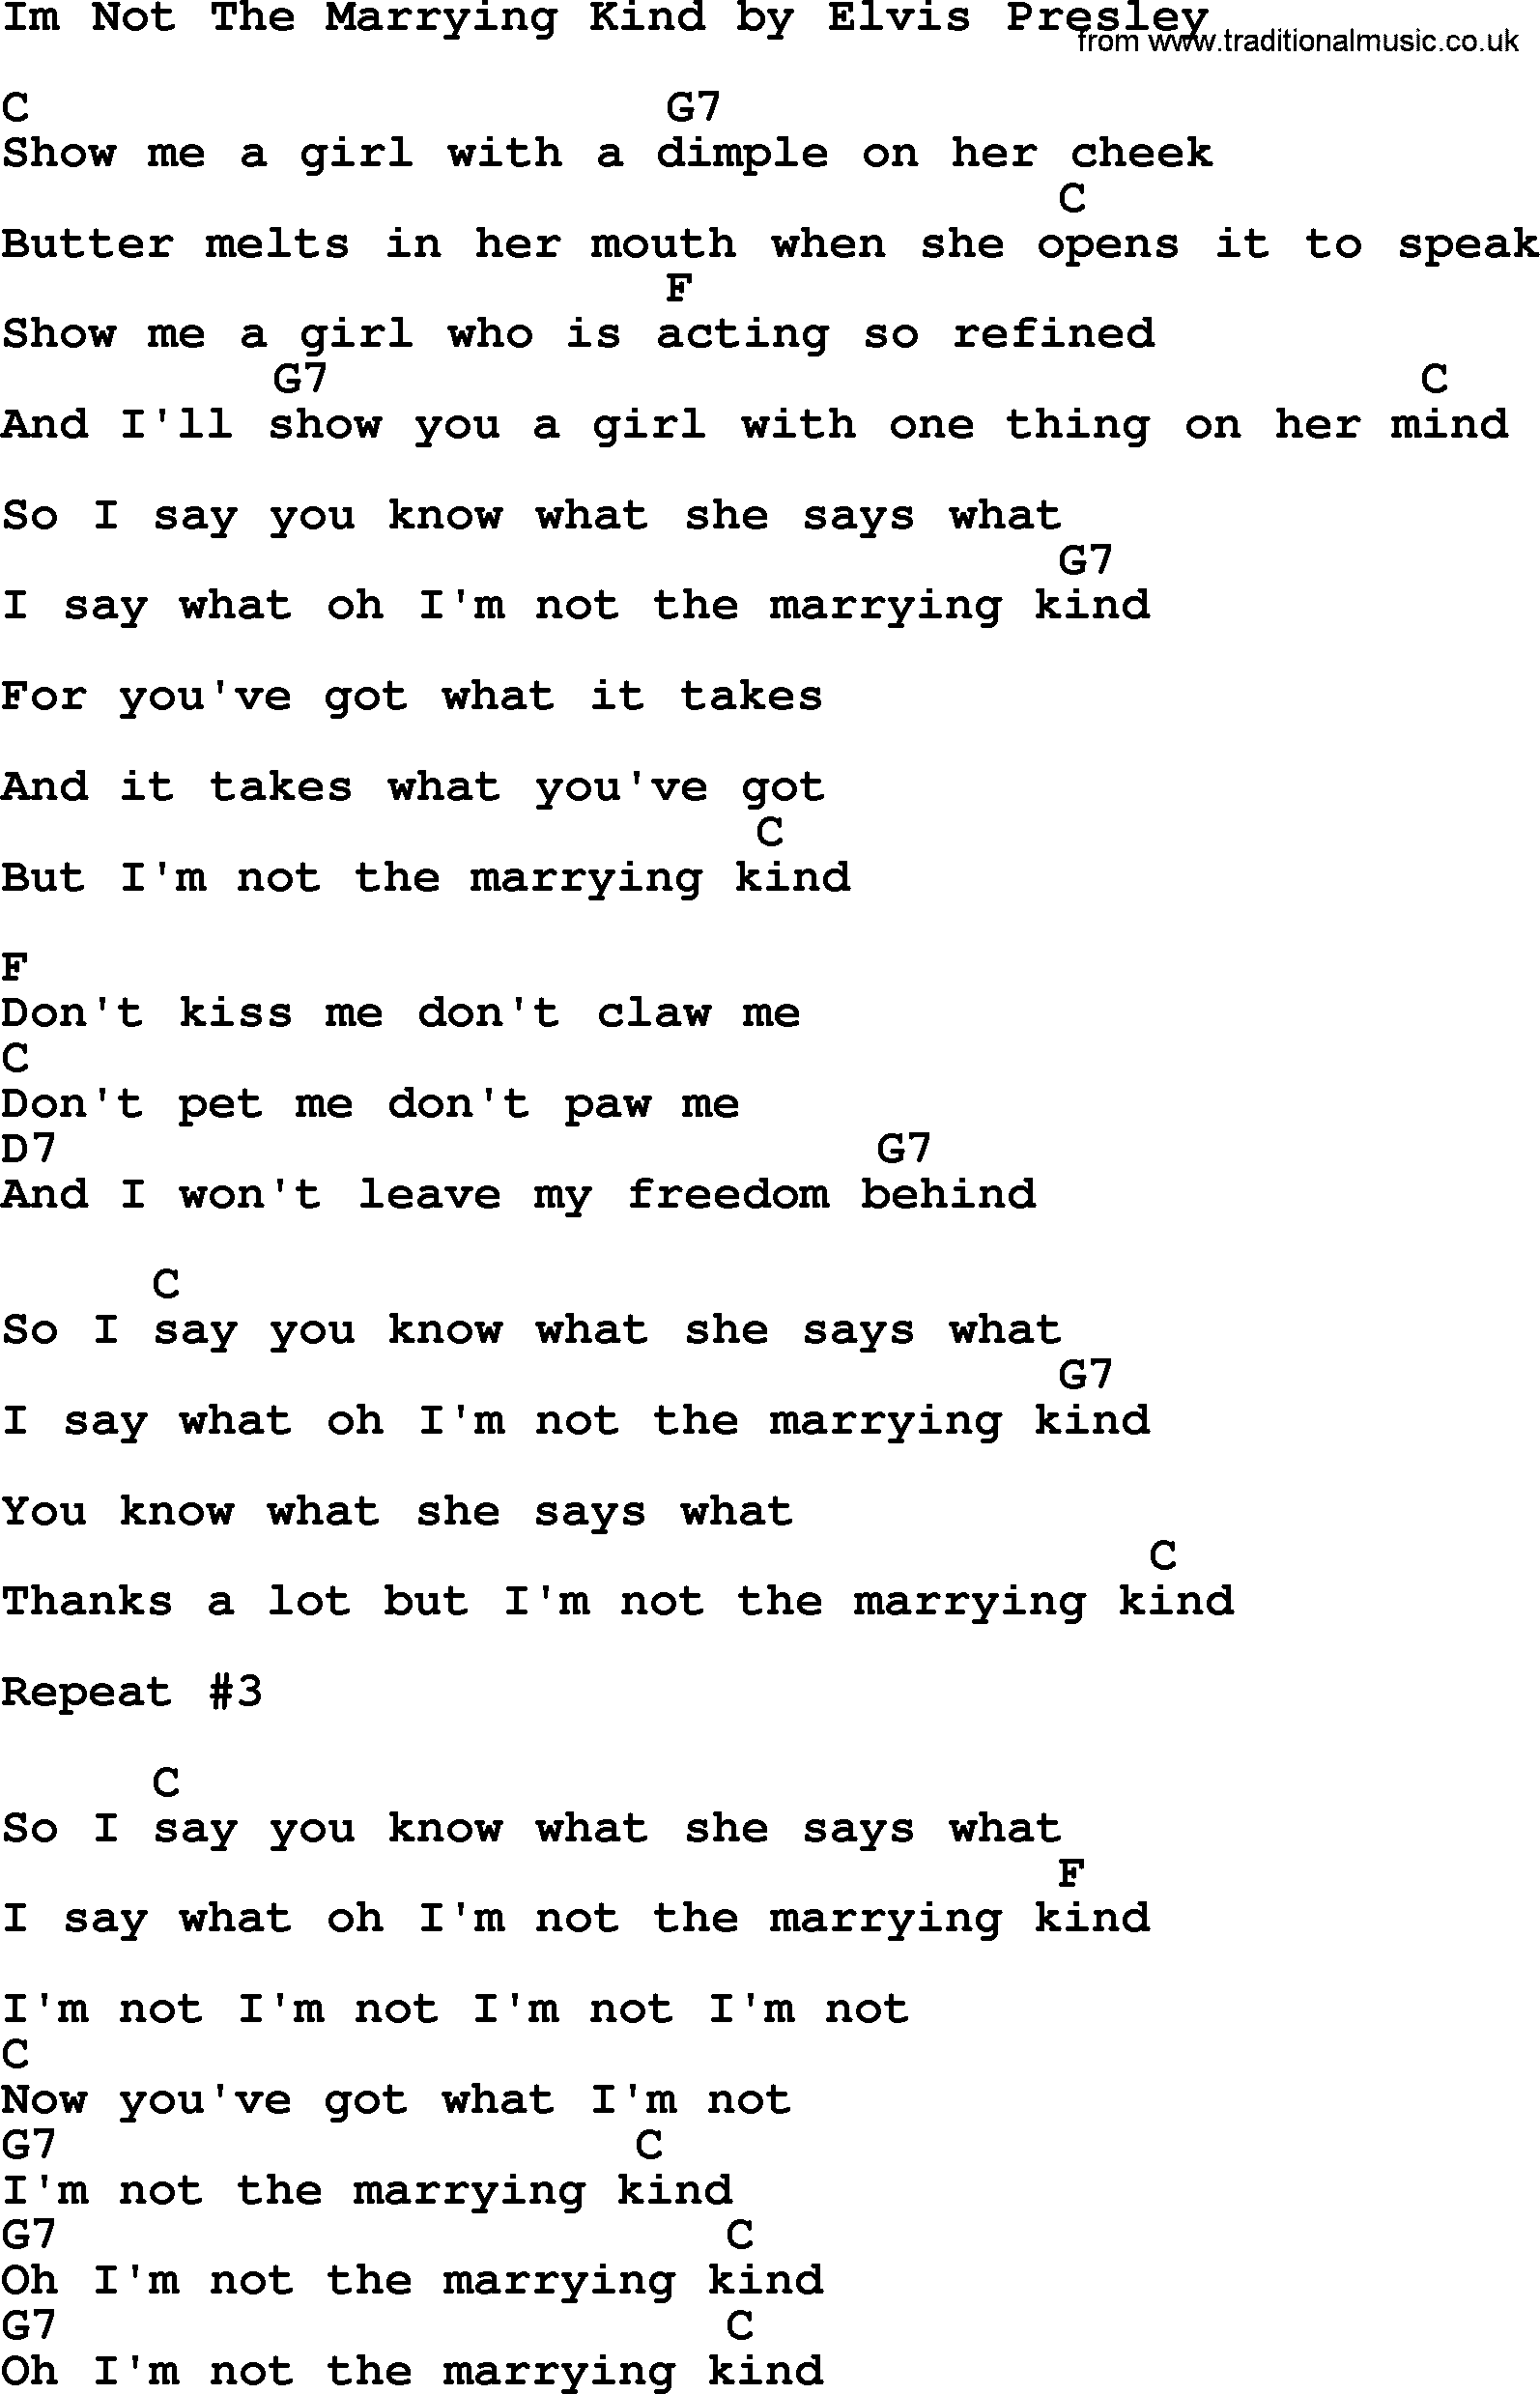 Elvis Presley song: Im Not The Marrying Kind, lyrics and chords